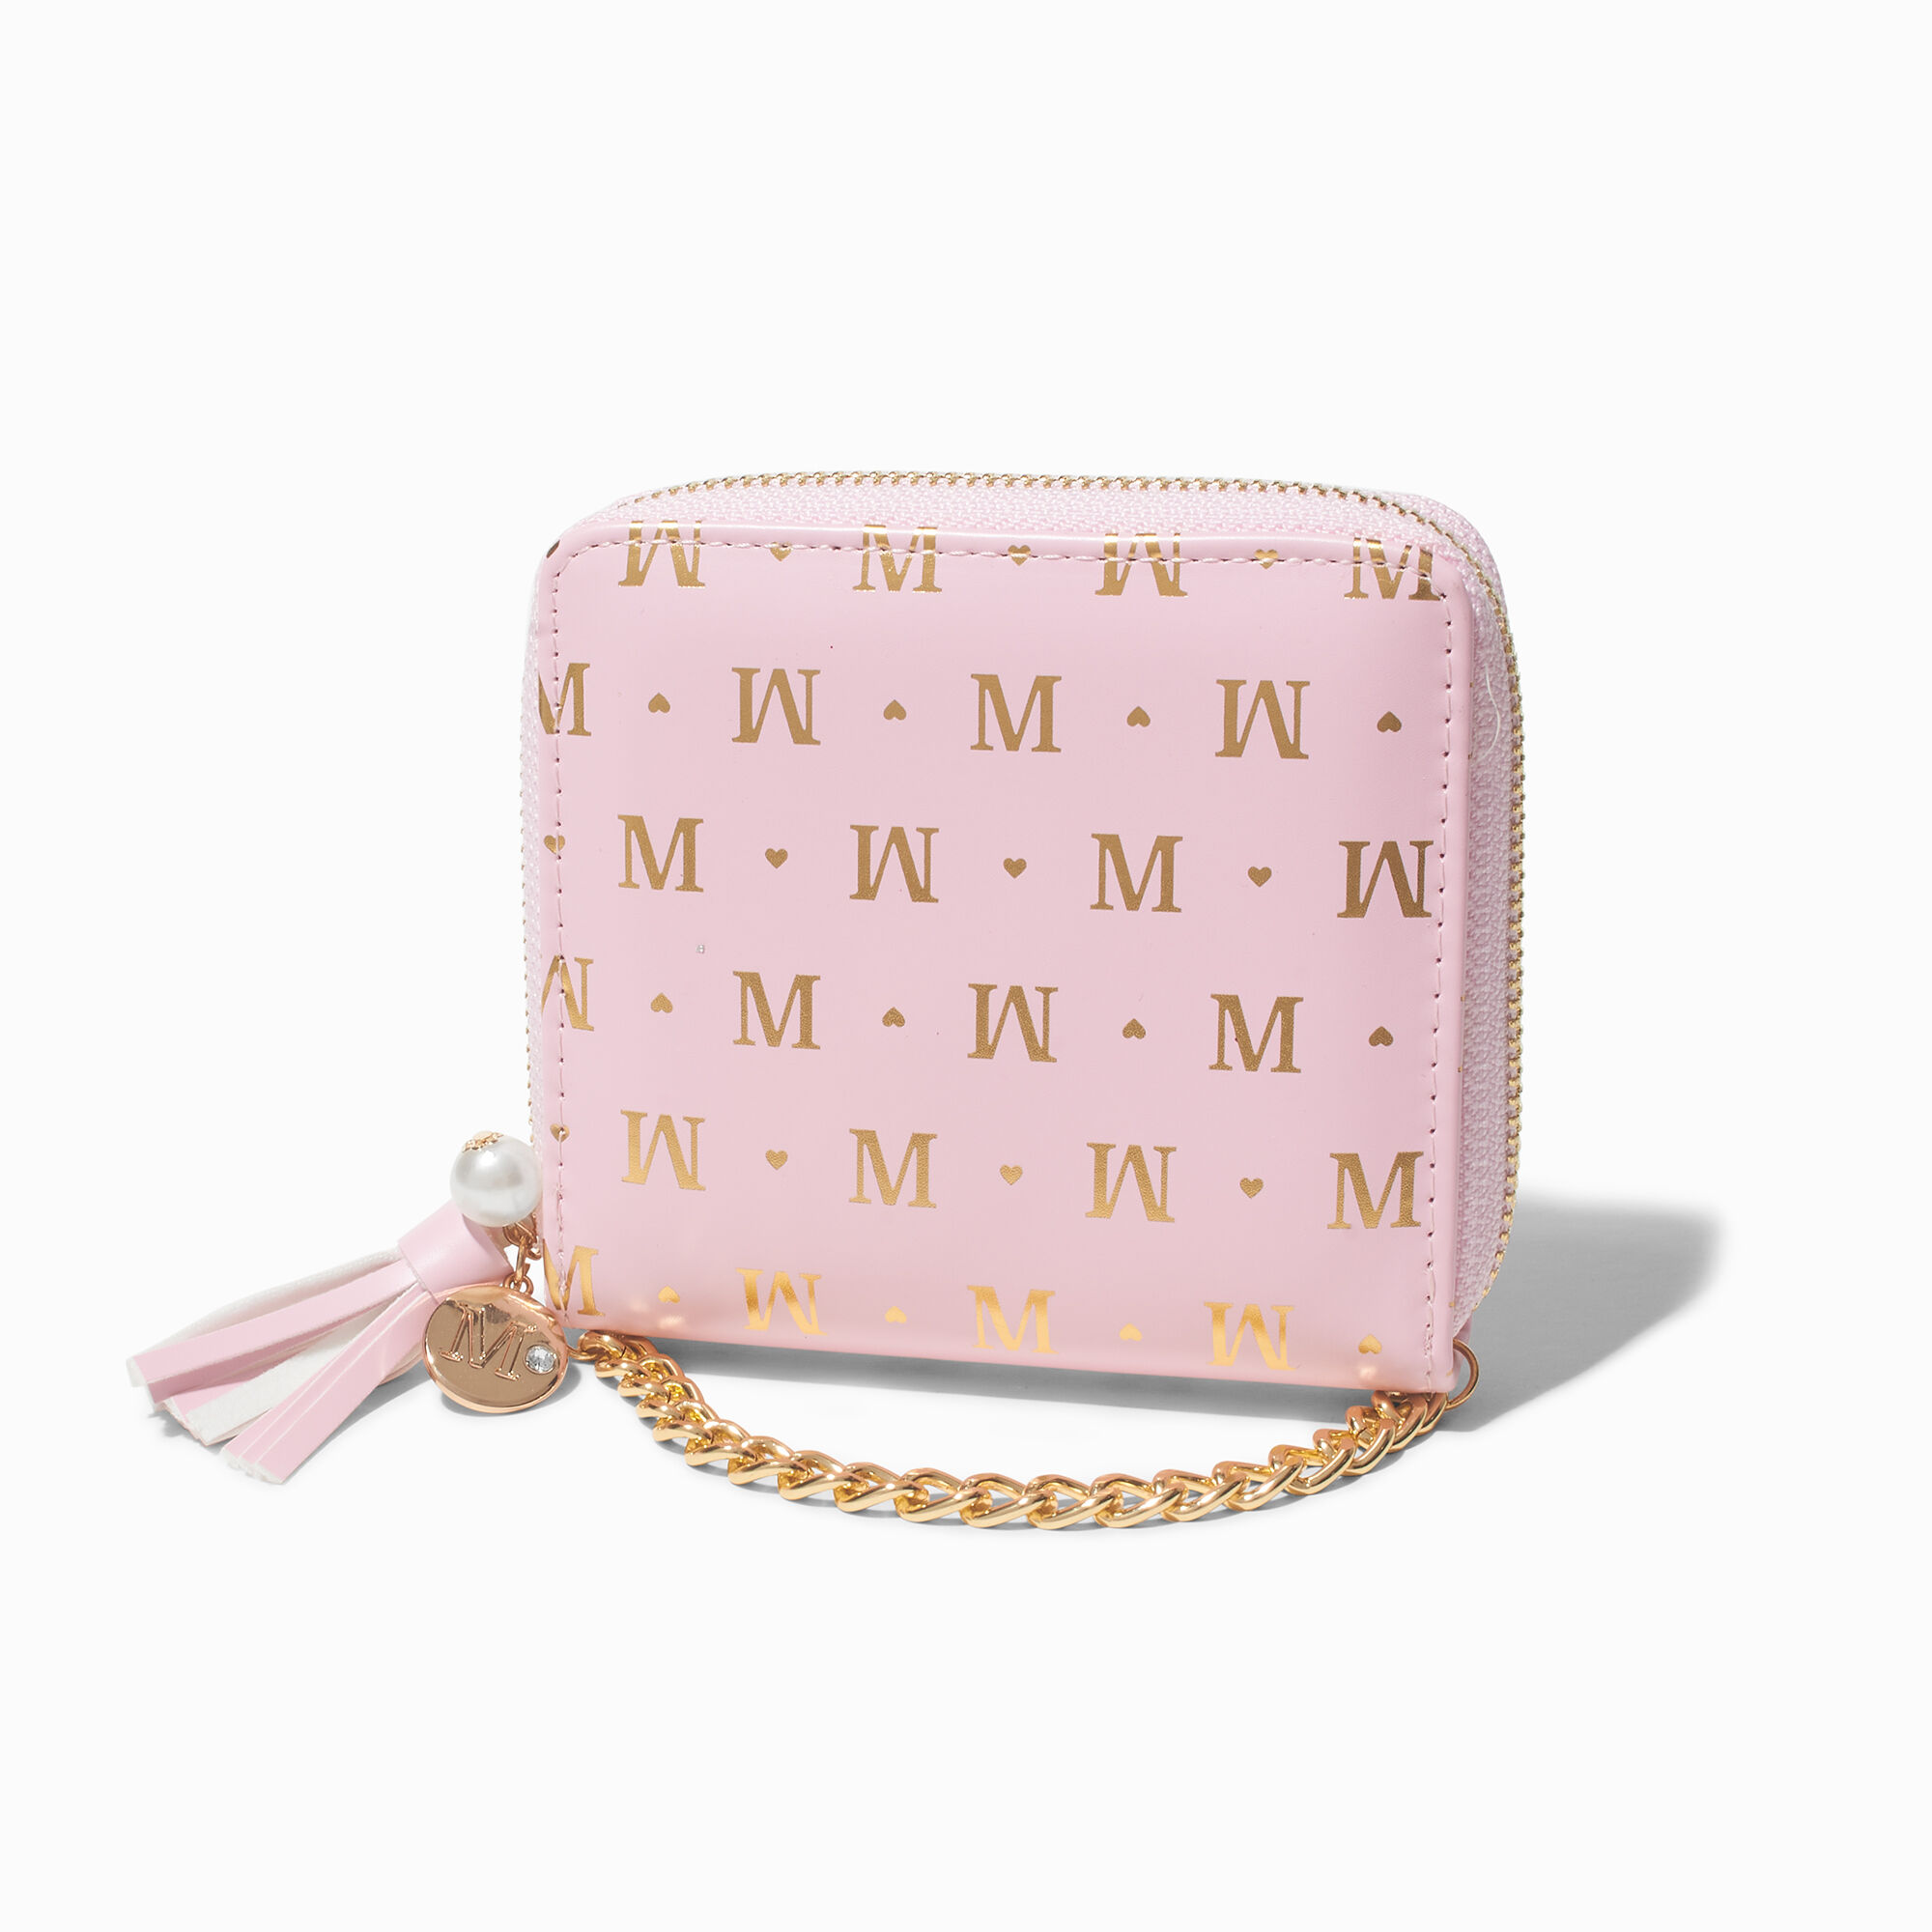 View Claires en Initial ChainStrap Wallet M Gold information